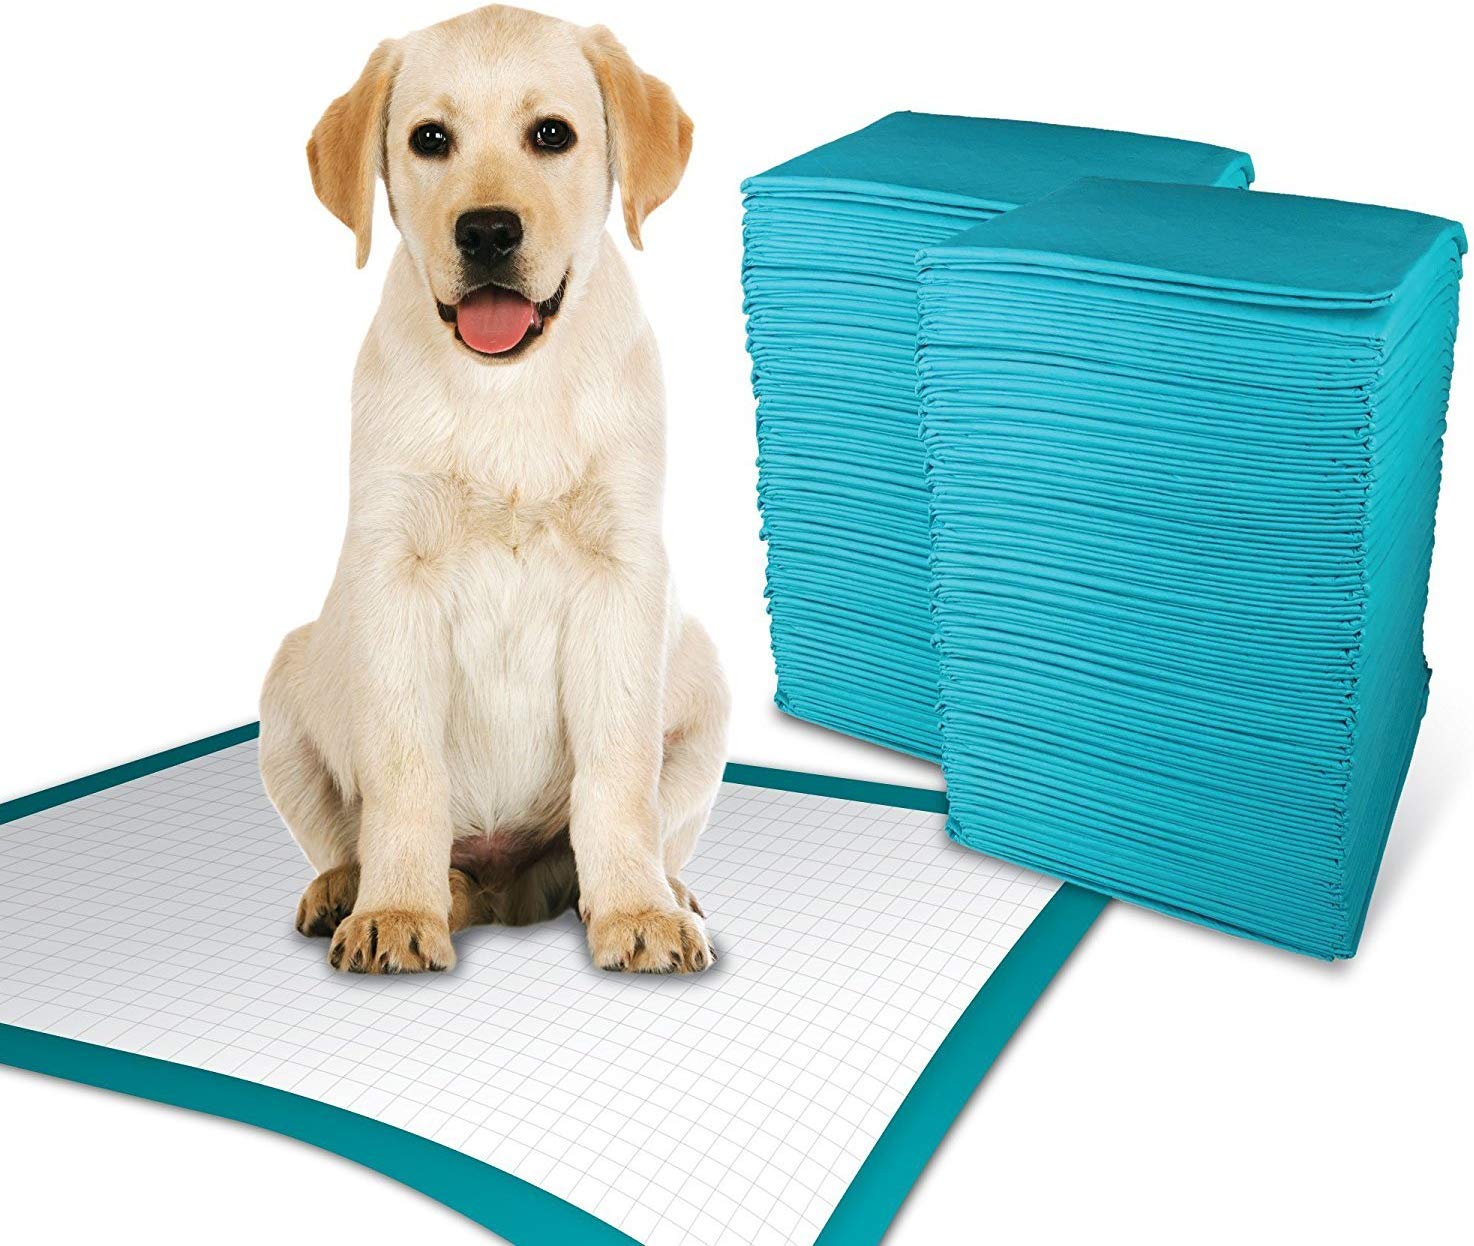 Simple Solution Premium Dog and Puppy Training Pads Pack